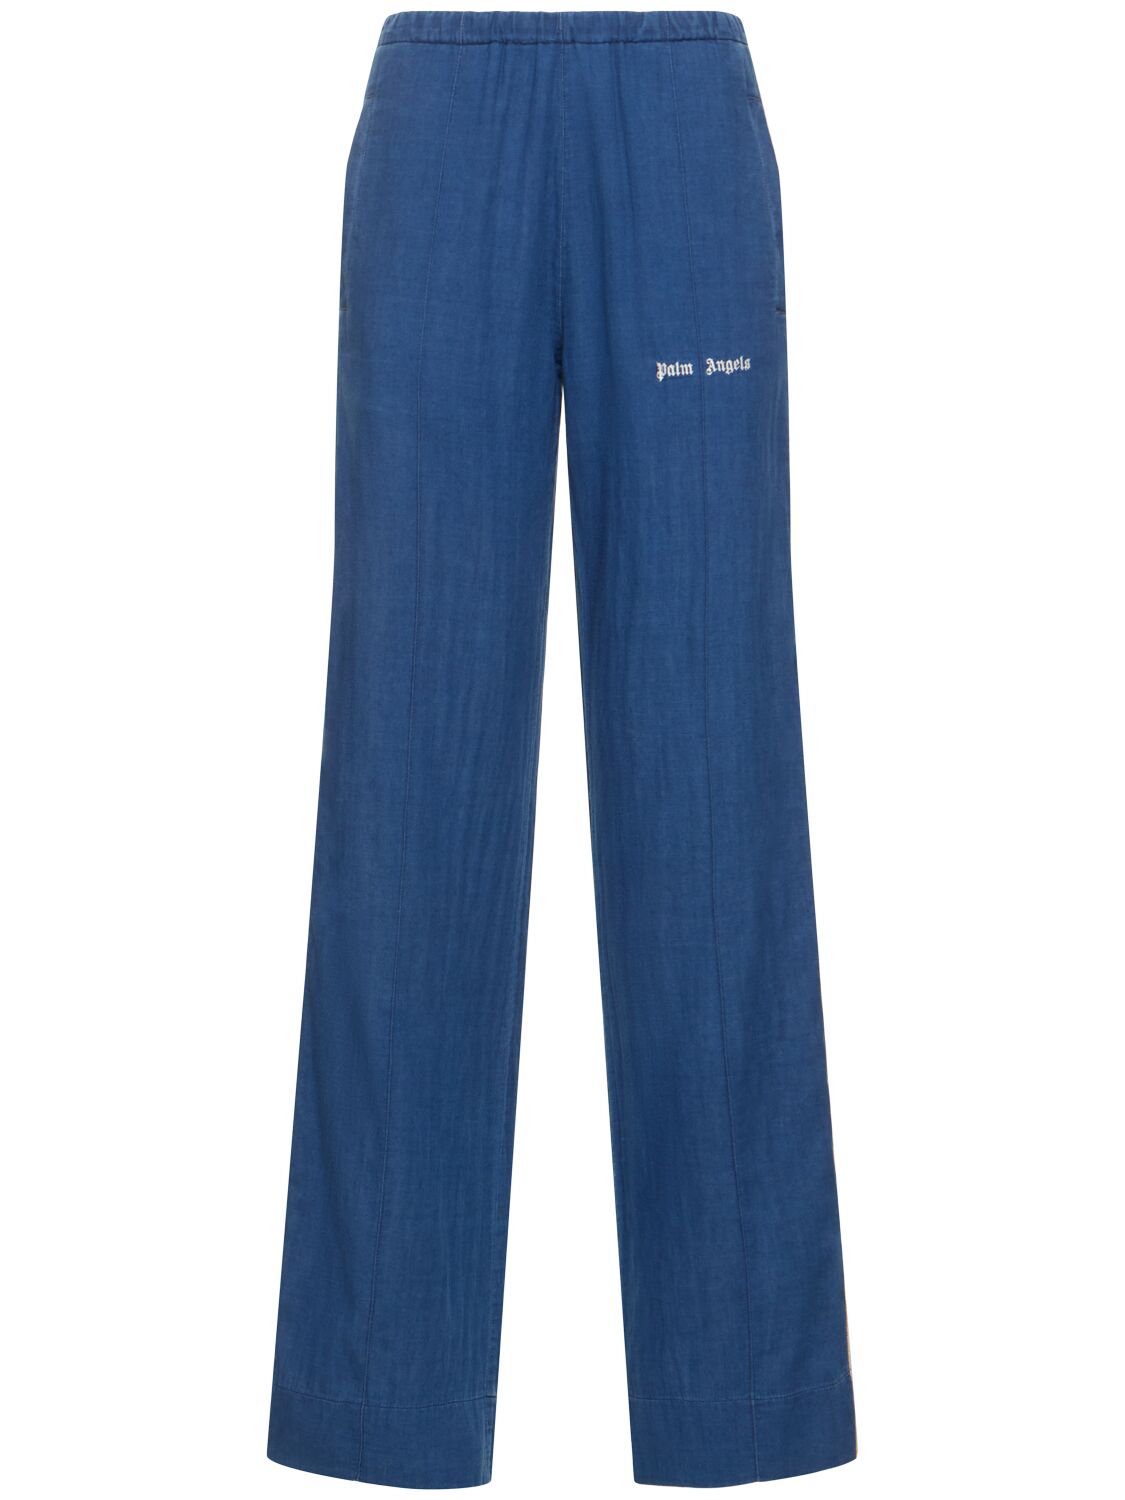 Image of Cotton Chambray Track Pants